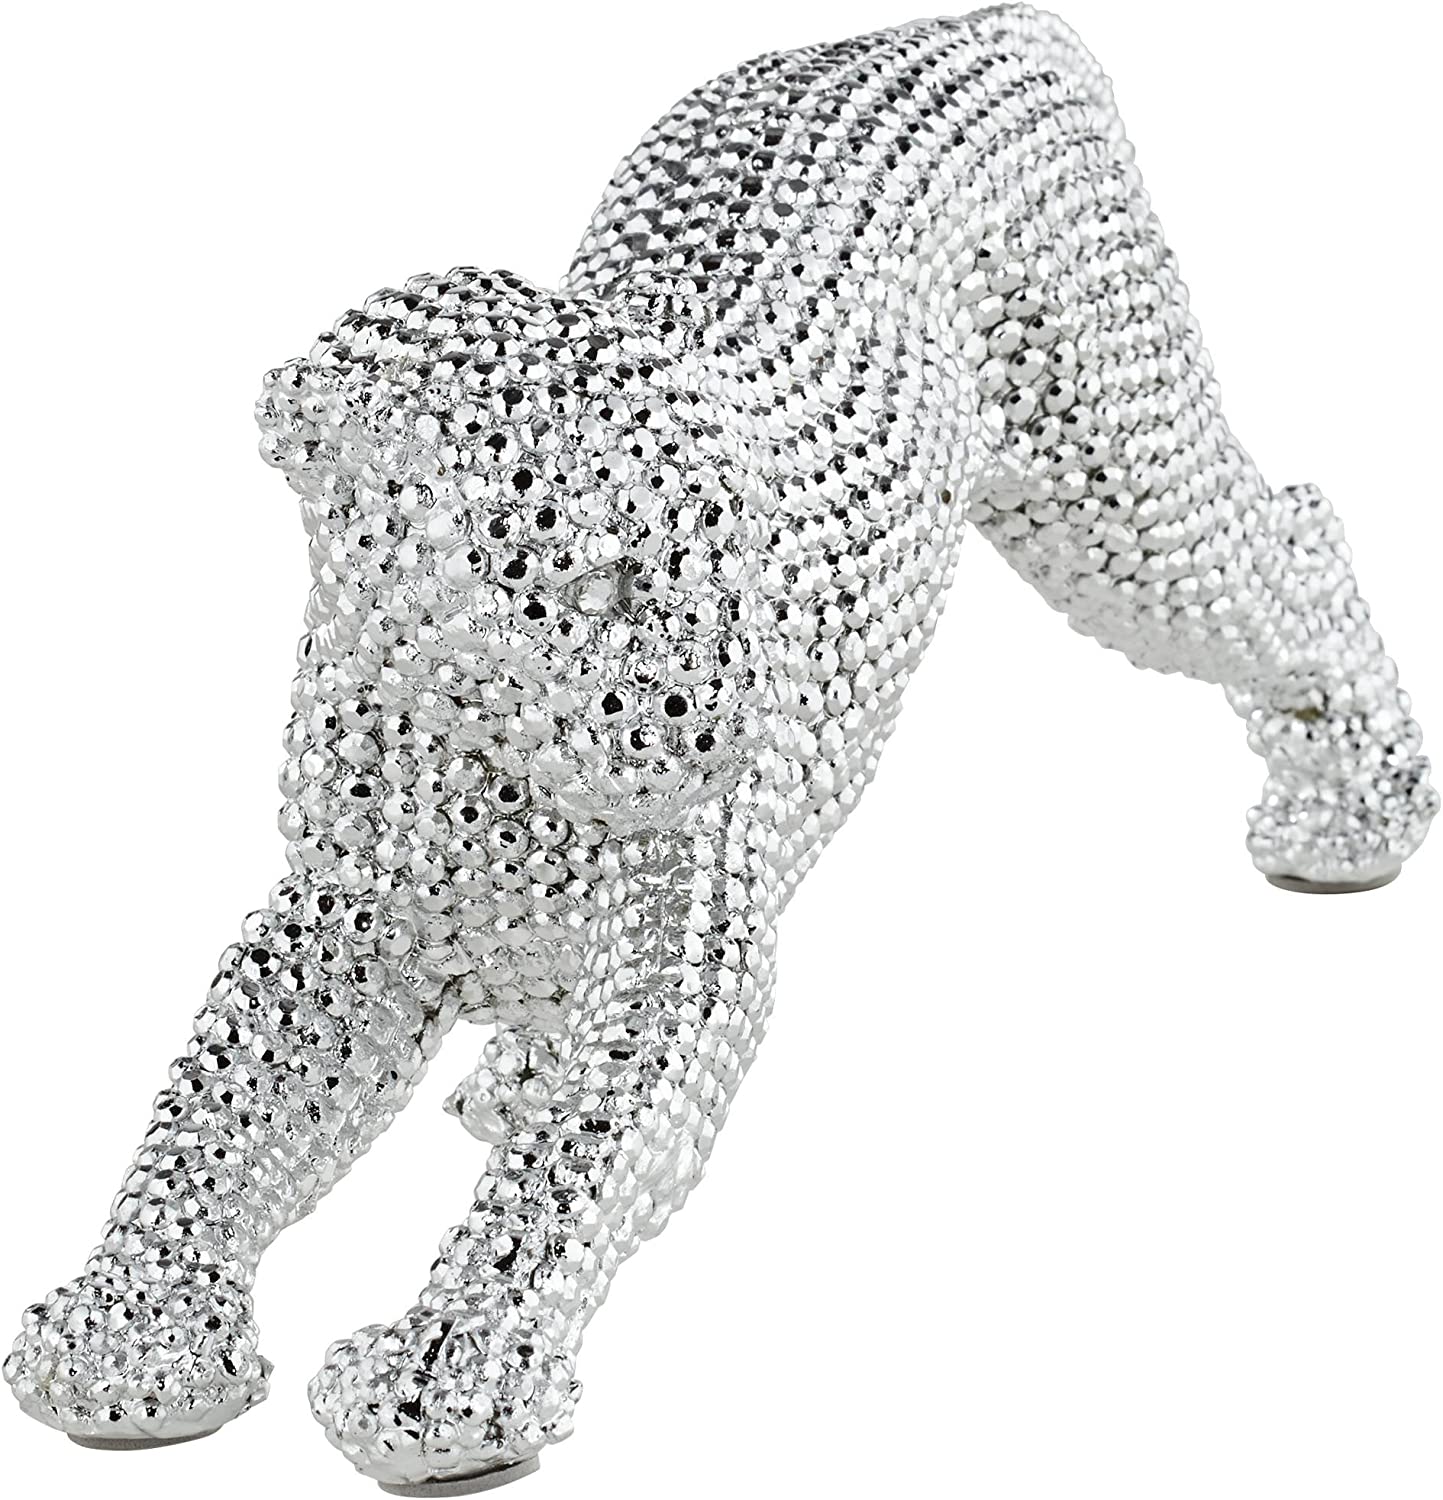 A silver sculpture of a leopard in a prowling pose.